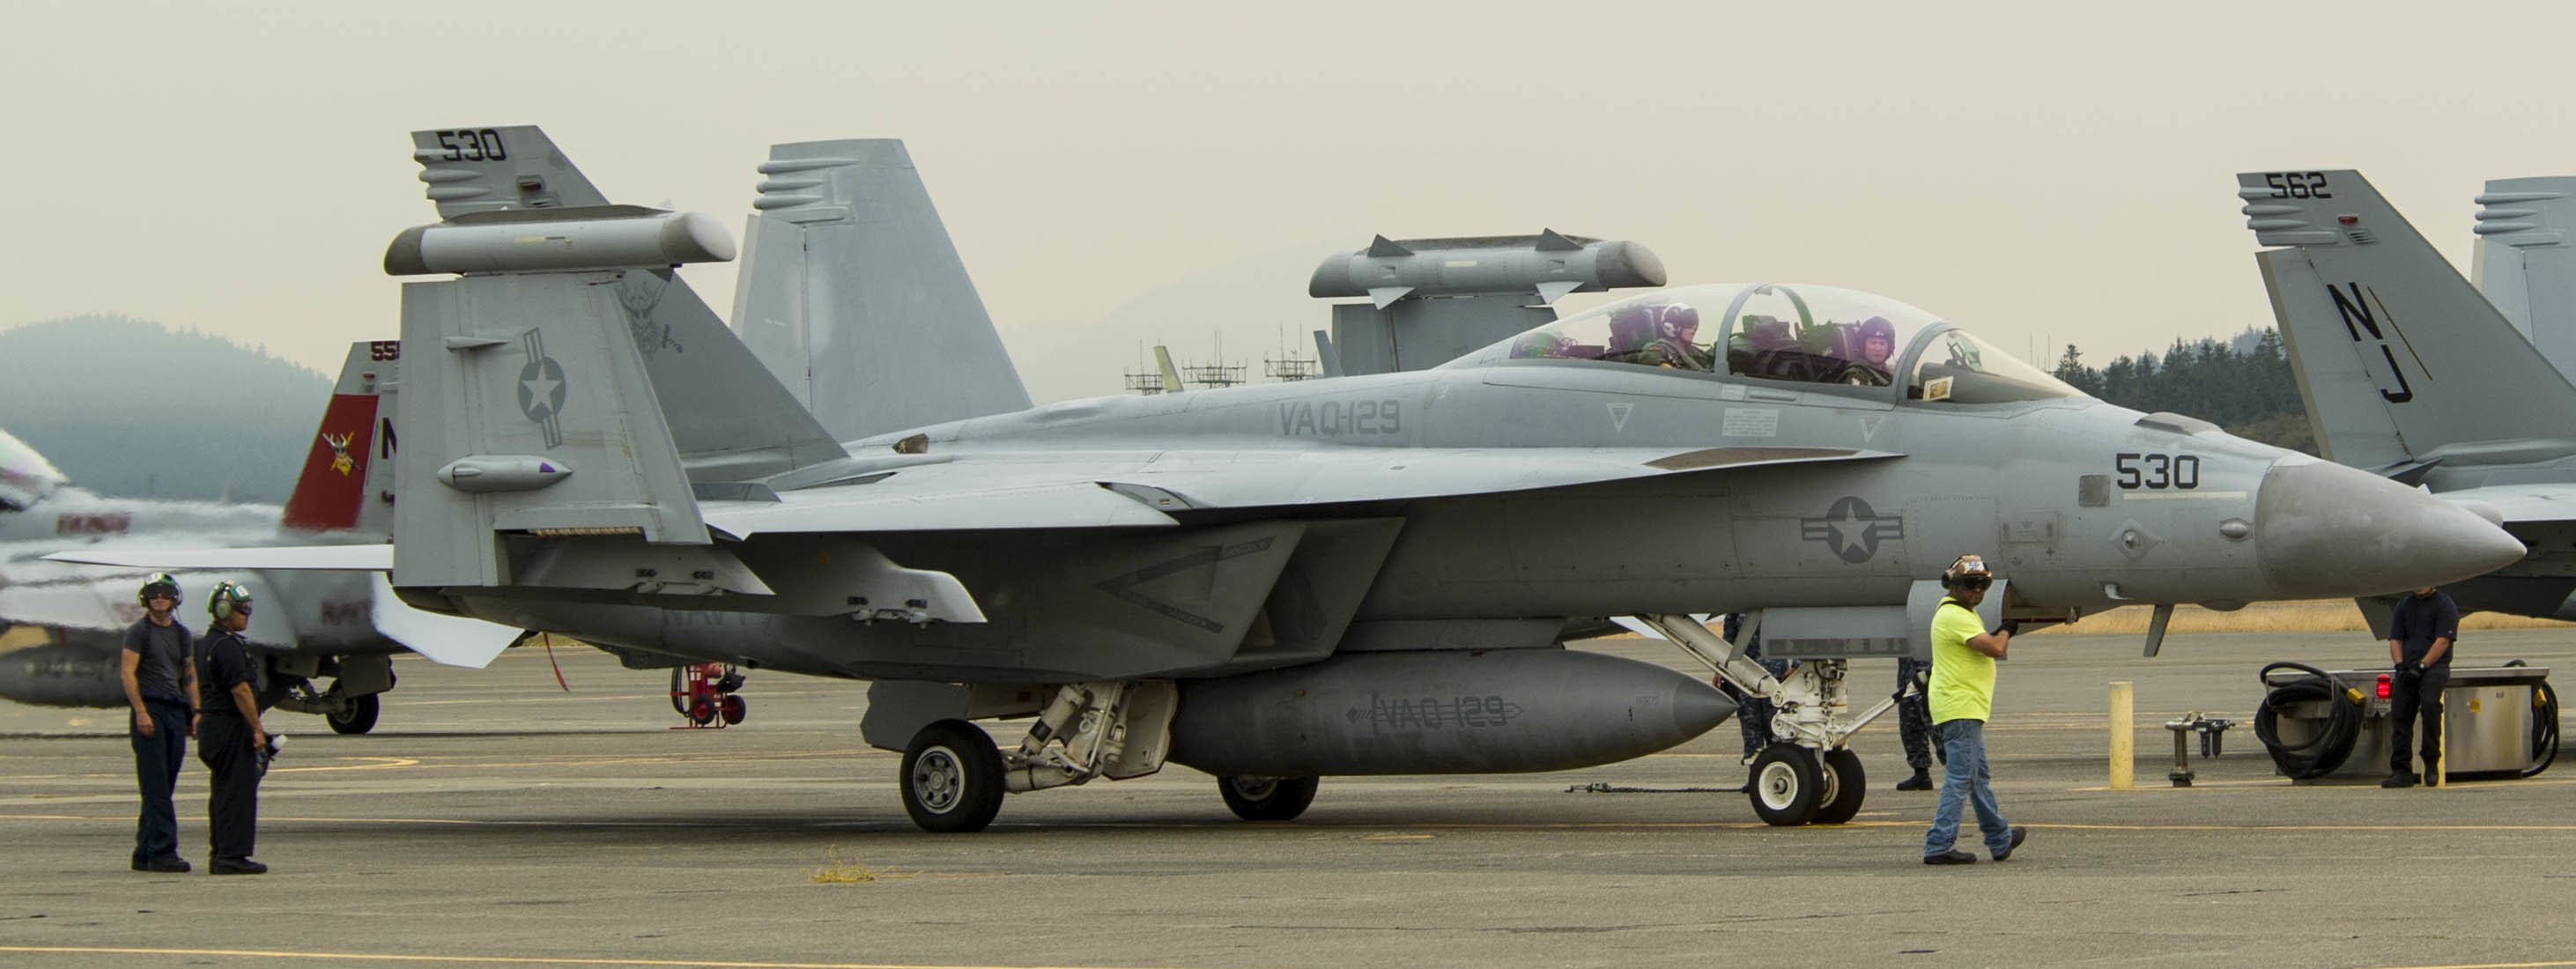 vaq-129 vikings electronic attack squadron fleet replacement frs us navy ea-18g growler 82 nas whidbey island